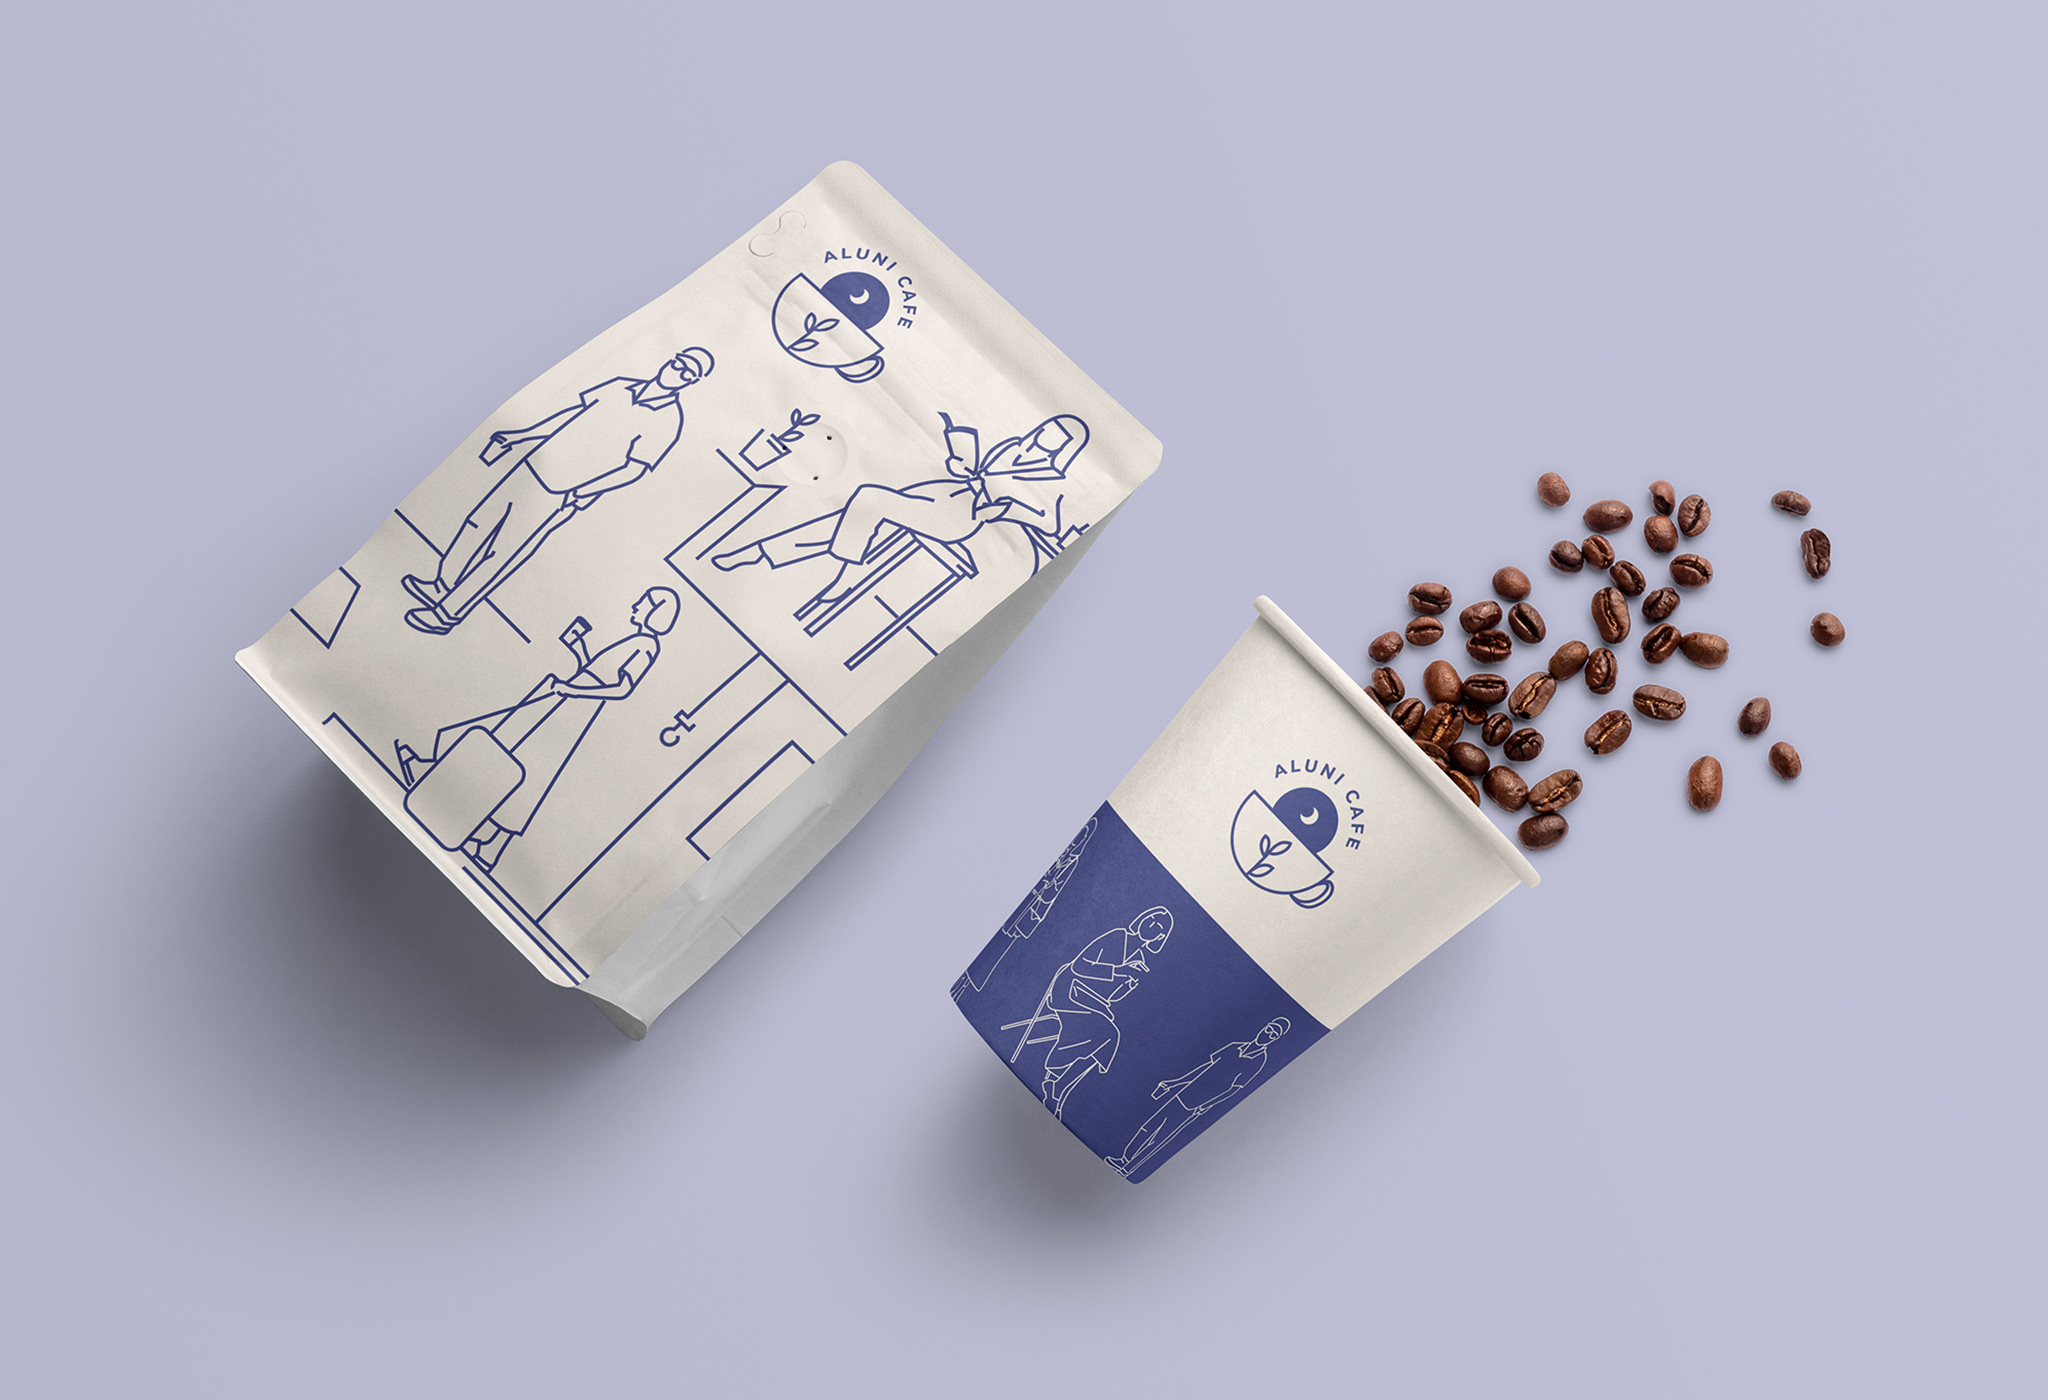 Mockup of cup and coffee package design for Aluni Cafe, an imagined coffee shop.